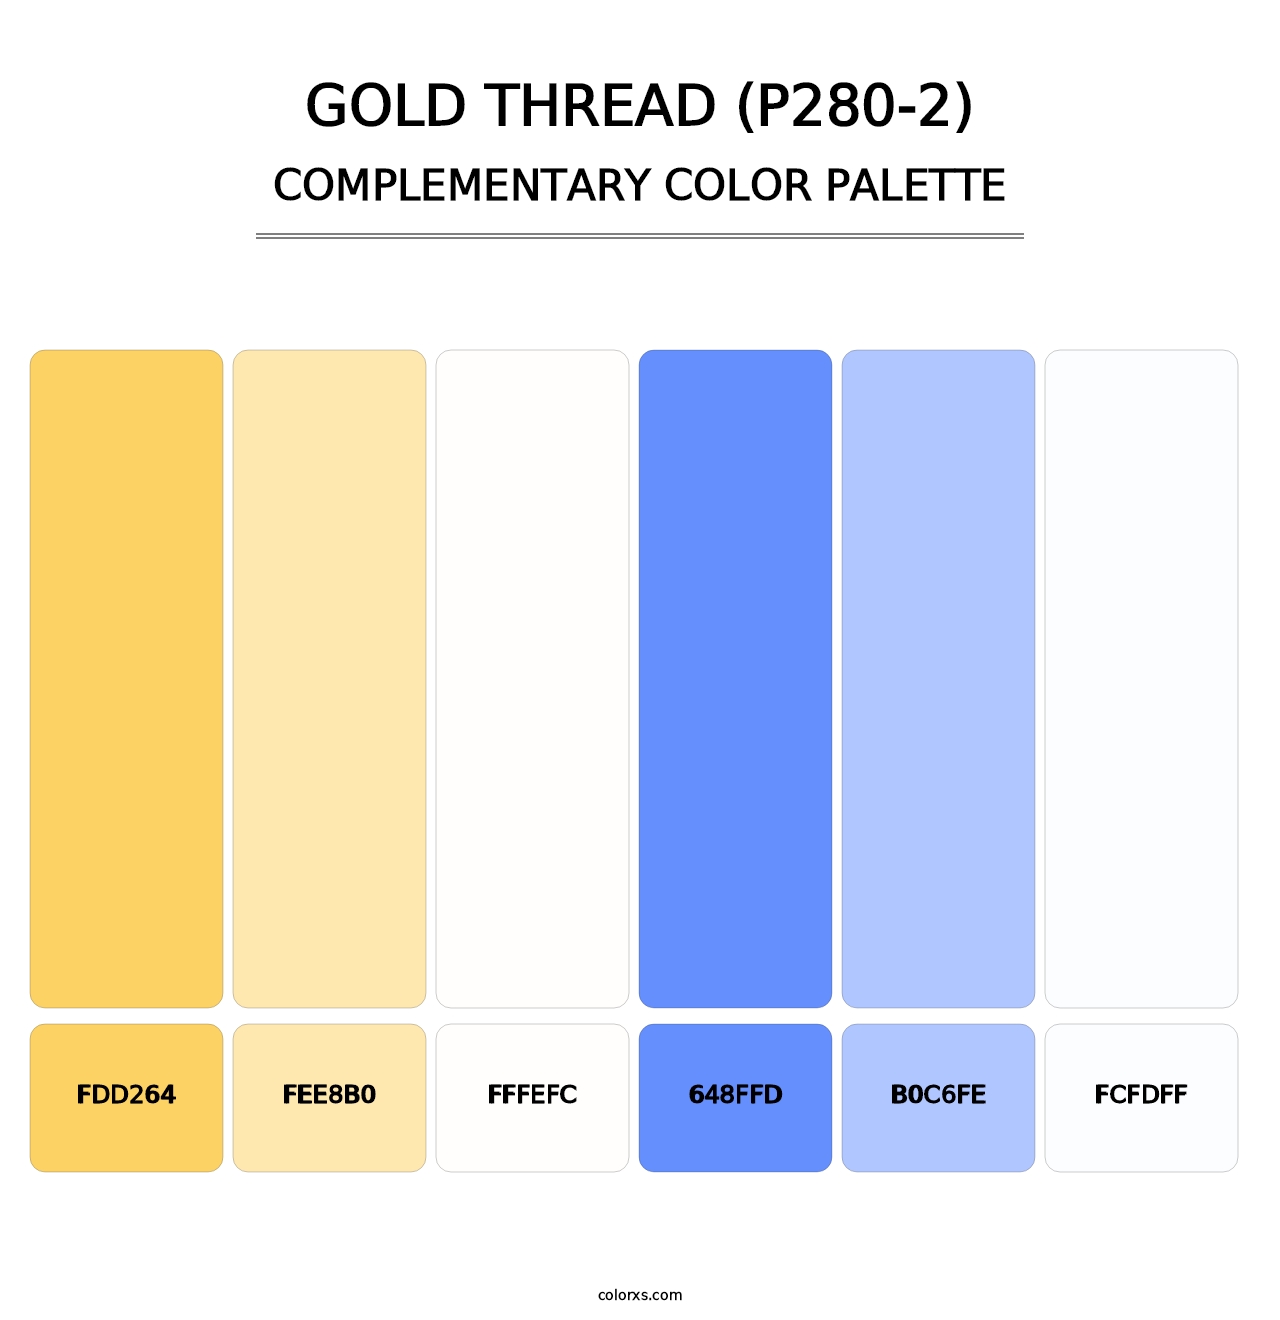 Gold Thread (P280-2) - Complementary Color Palette